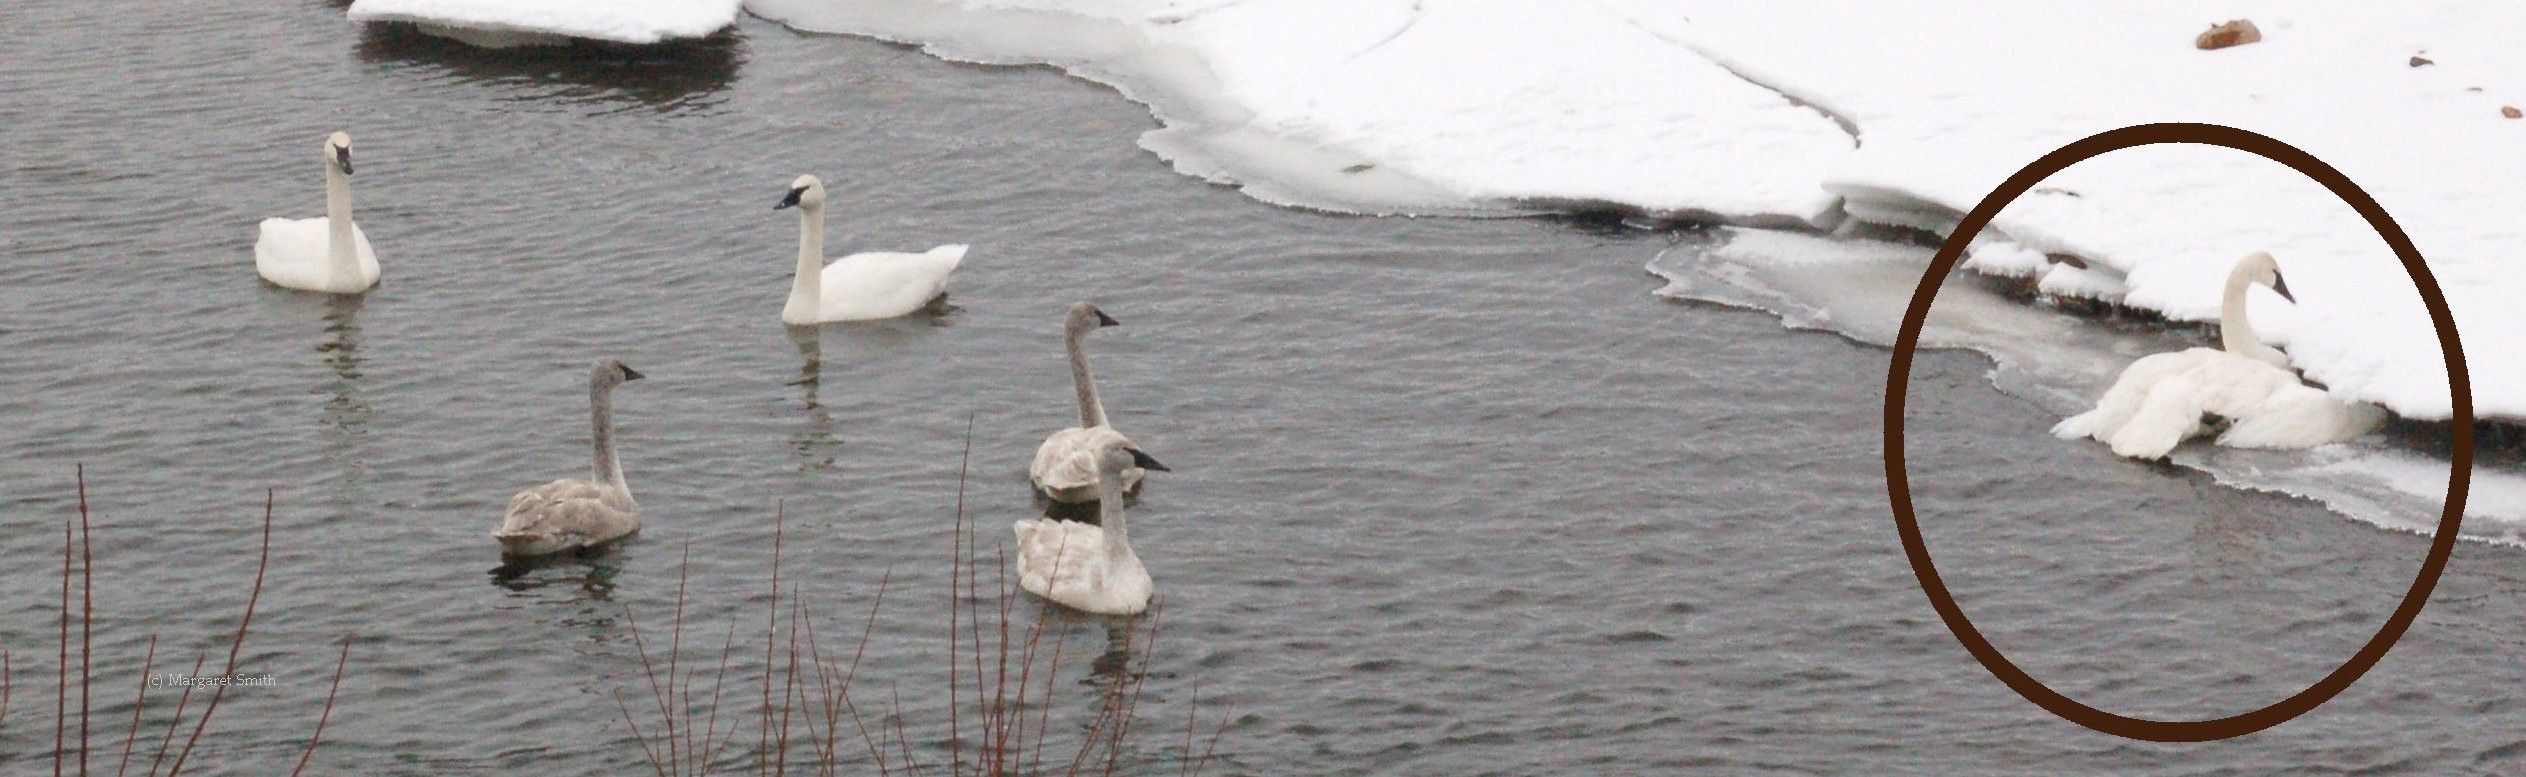 The Trumpeter Swan Society works on swan health issues, including lead poisoning and powerline collisions